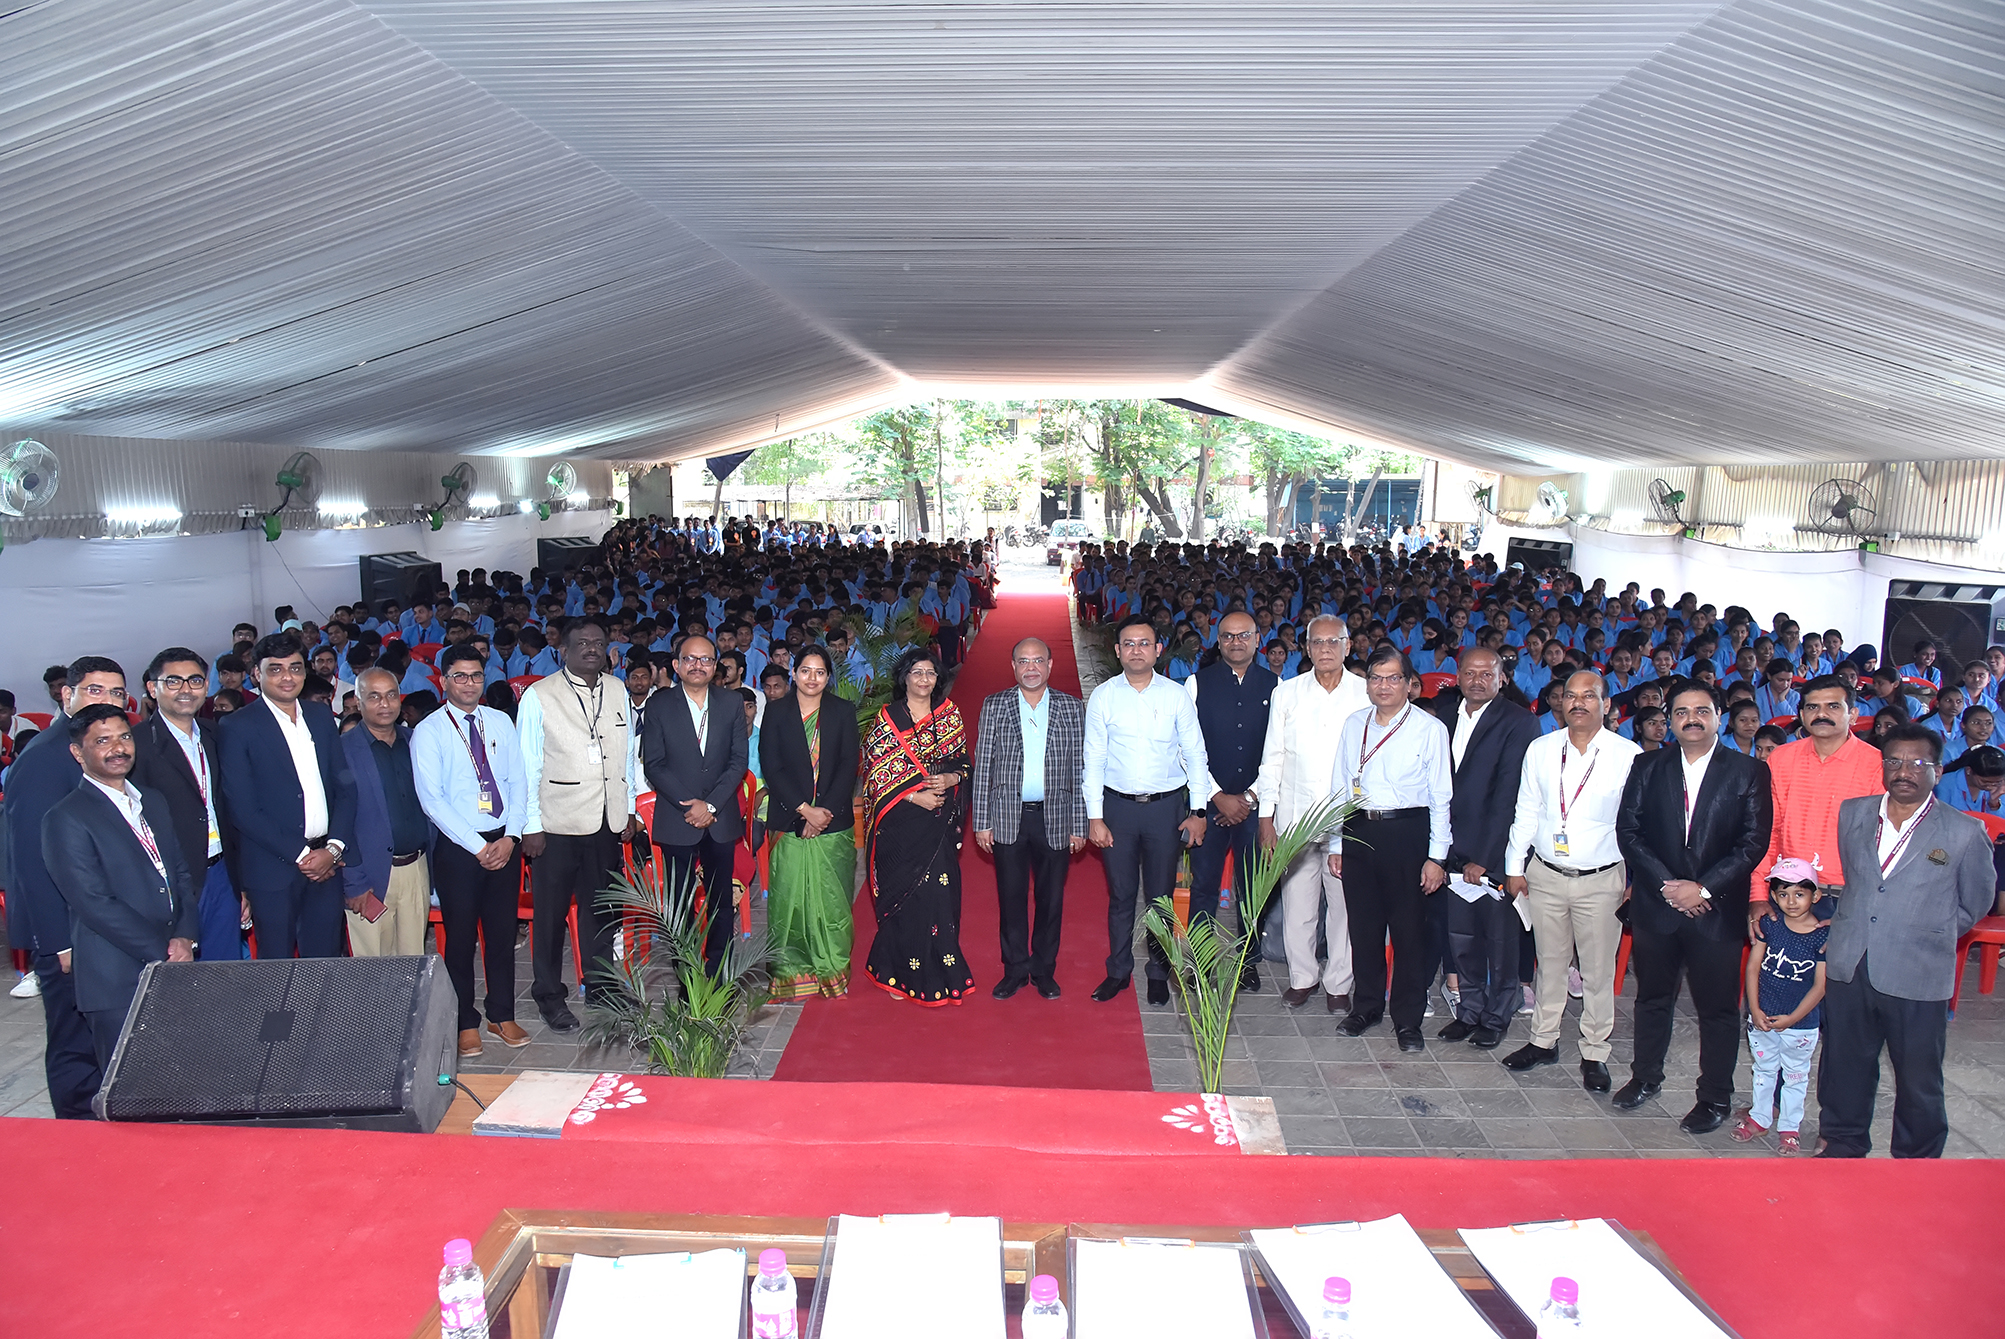 ISTE Students’ Chapter at Sanjivani K. B. P. Polytechnic, Kopargaon organized a National Level Technical Symposium in association with Rotary Club Kopargaon Central on 11/04/2023.